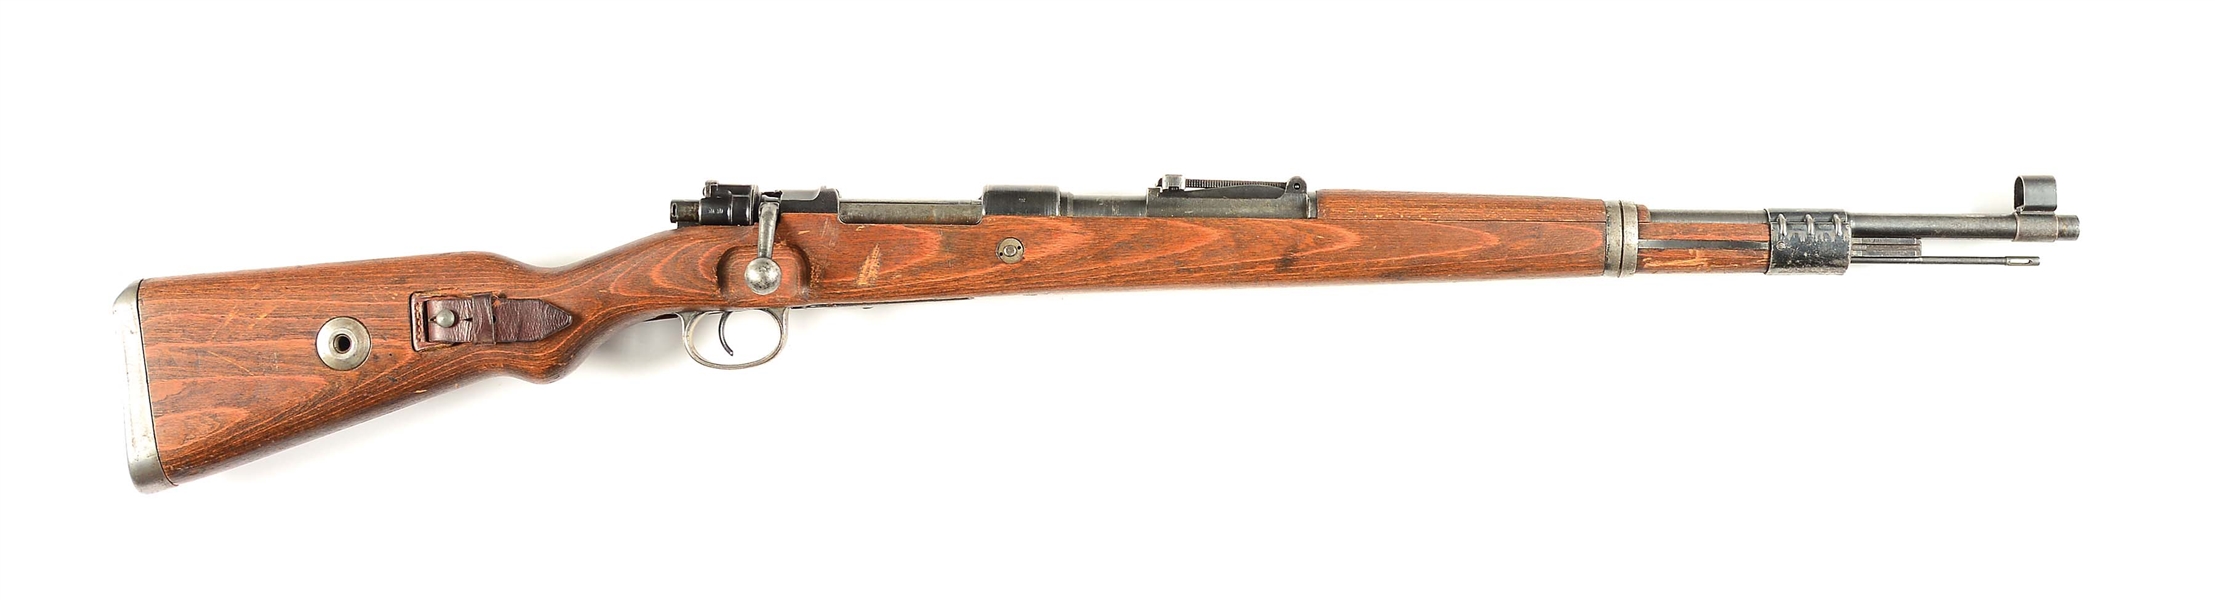 (C) MAUSER "BYF" CODE 1944 DATED K98 BOLT ACTION RIFLE.